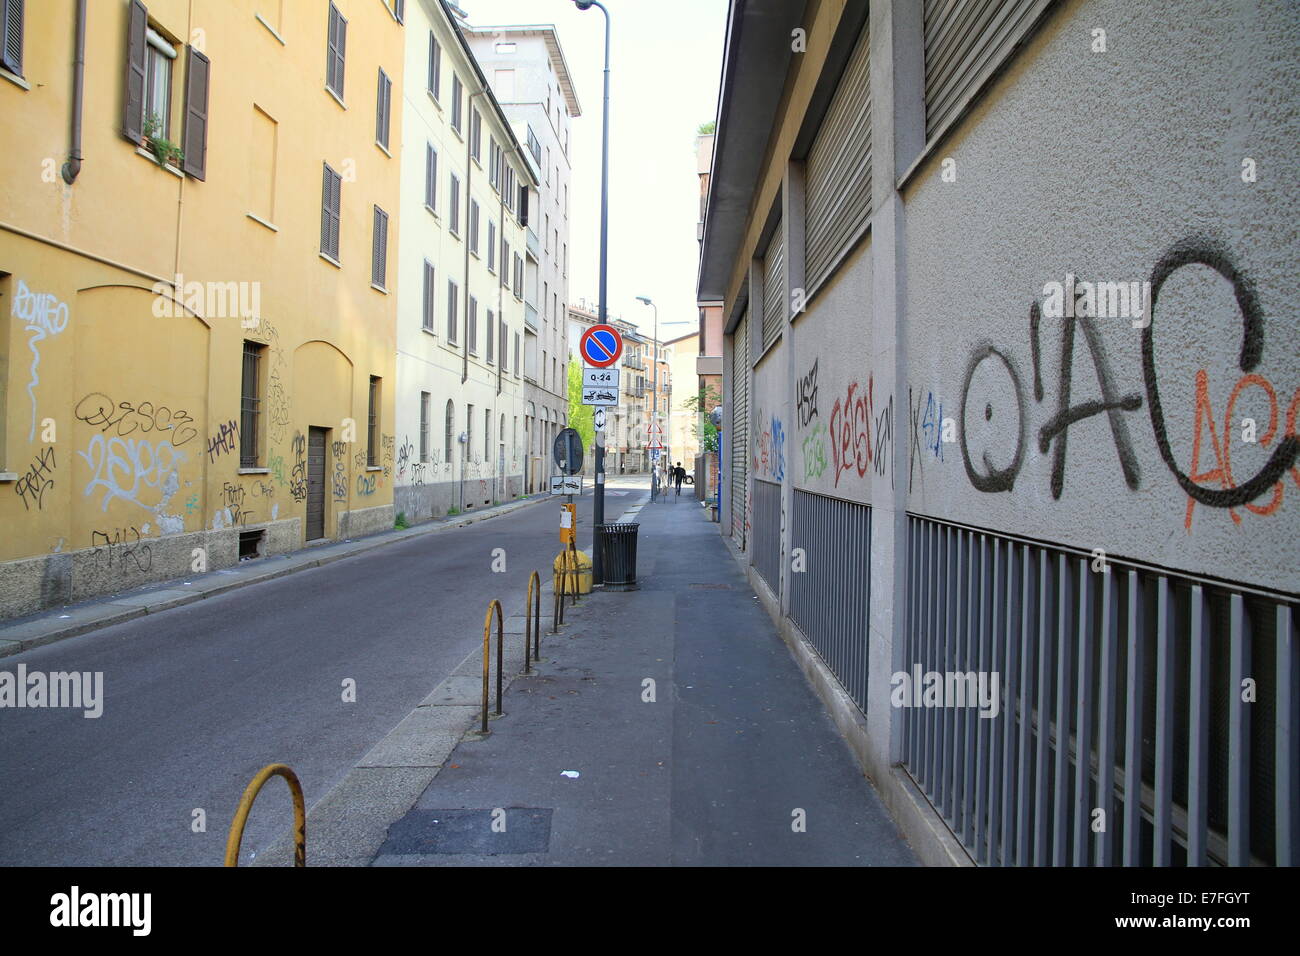 Graffiti and urban decay in a street in Milan, Italy Stock Photo